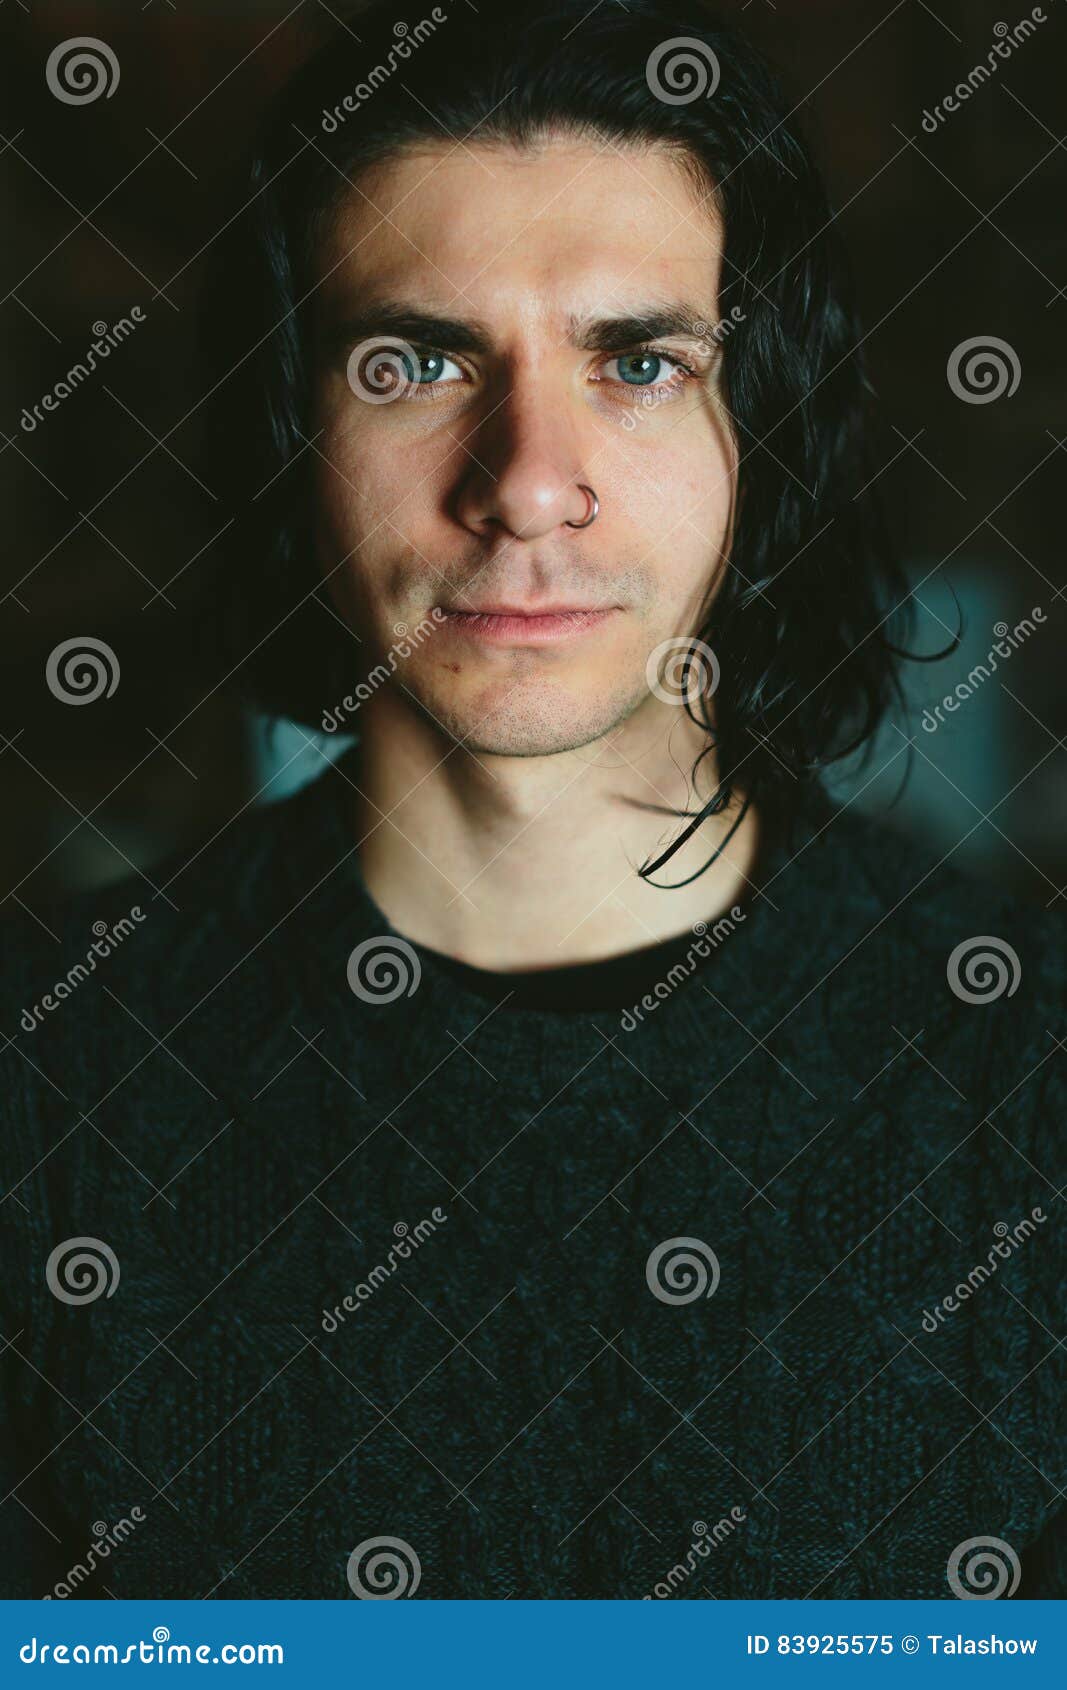 Portrait of the Young Long-haired Brunette Man Stock Image - Image of ...